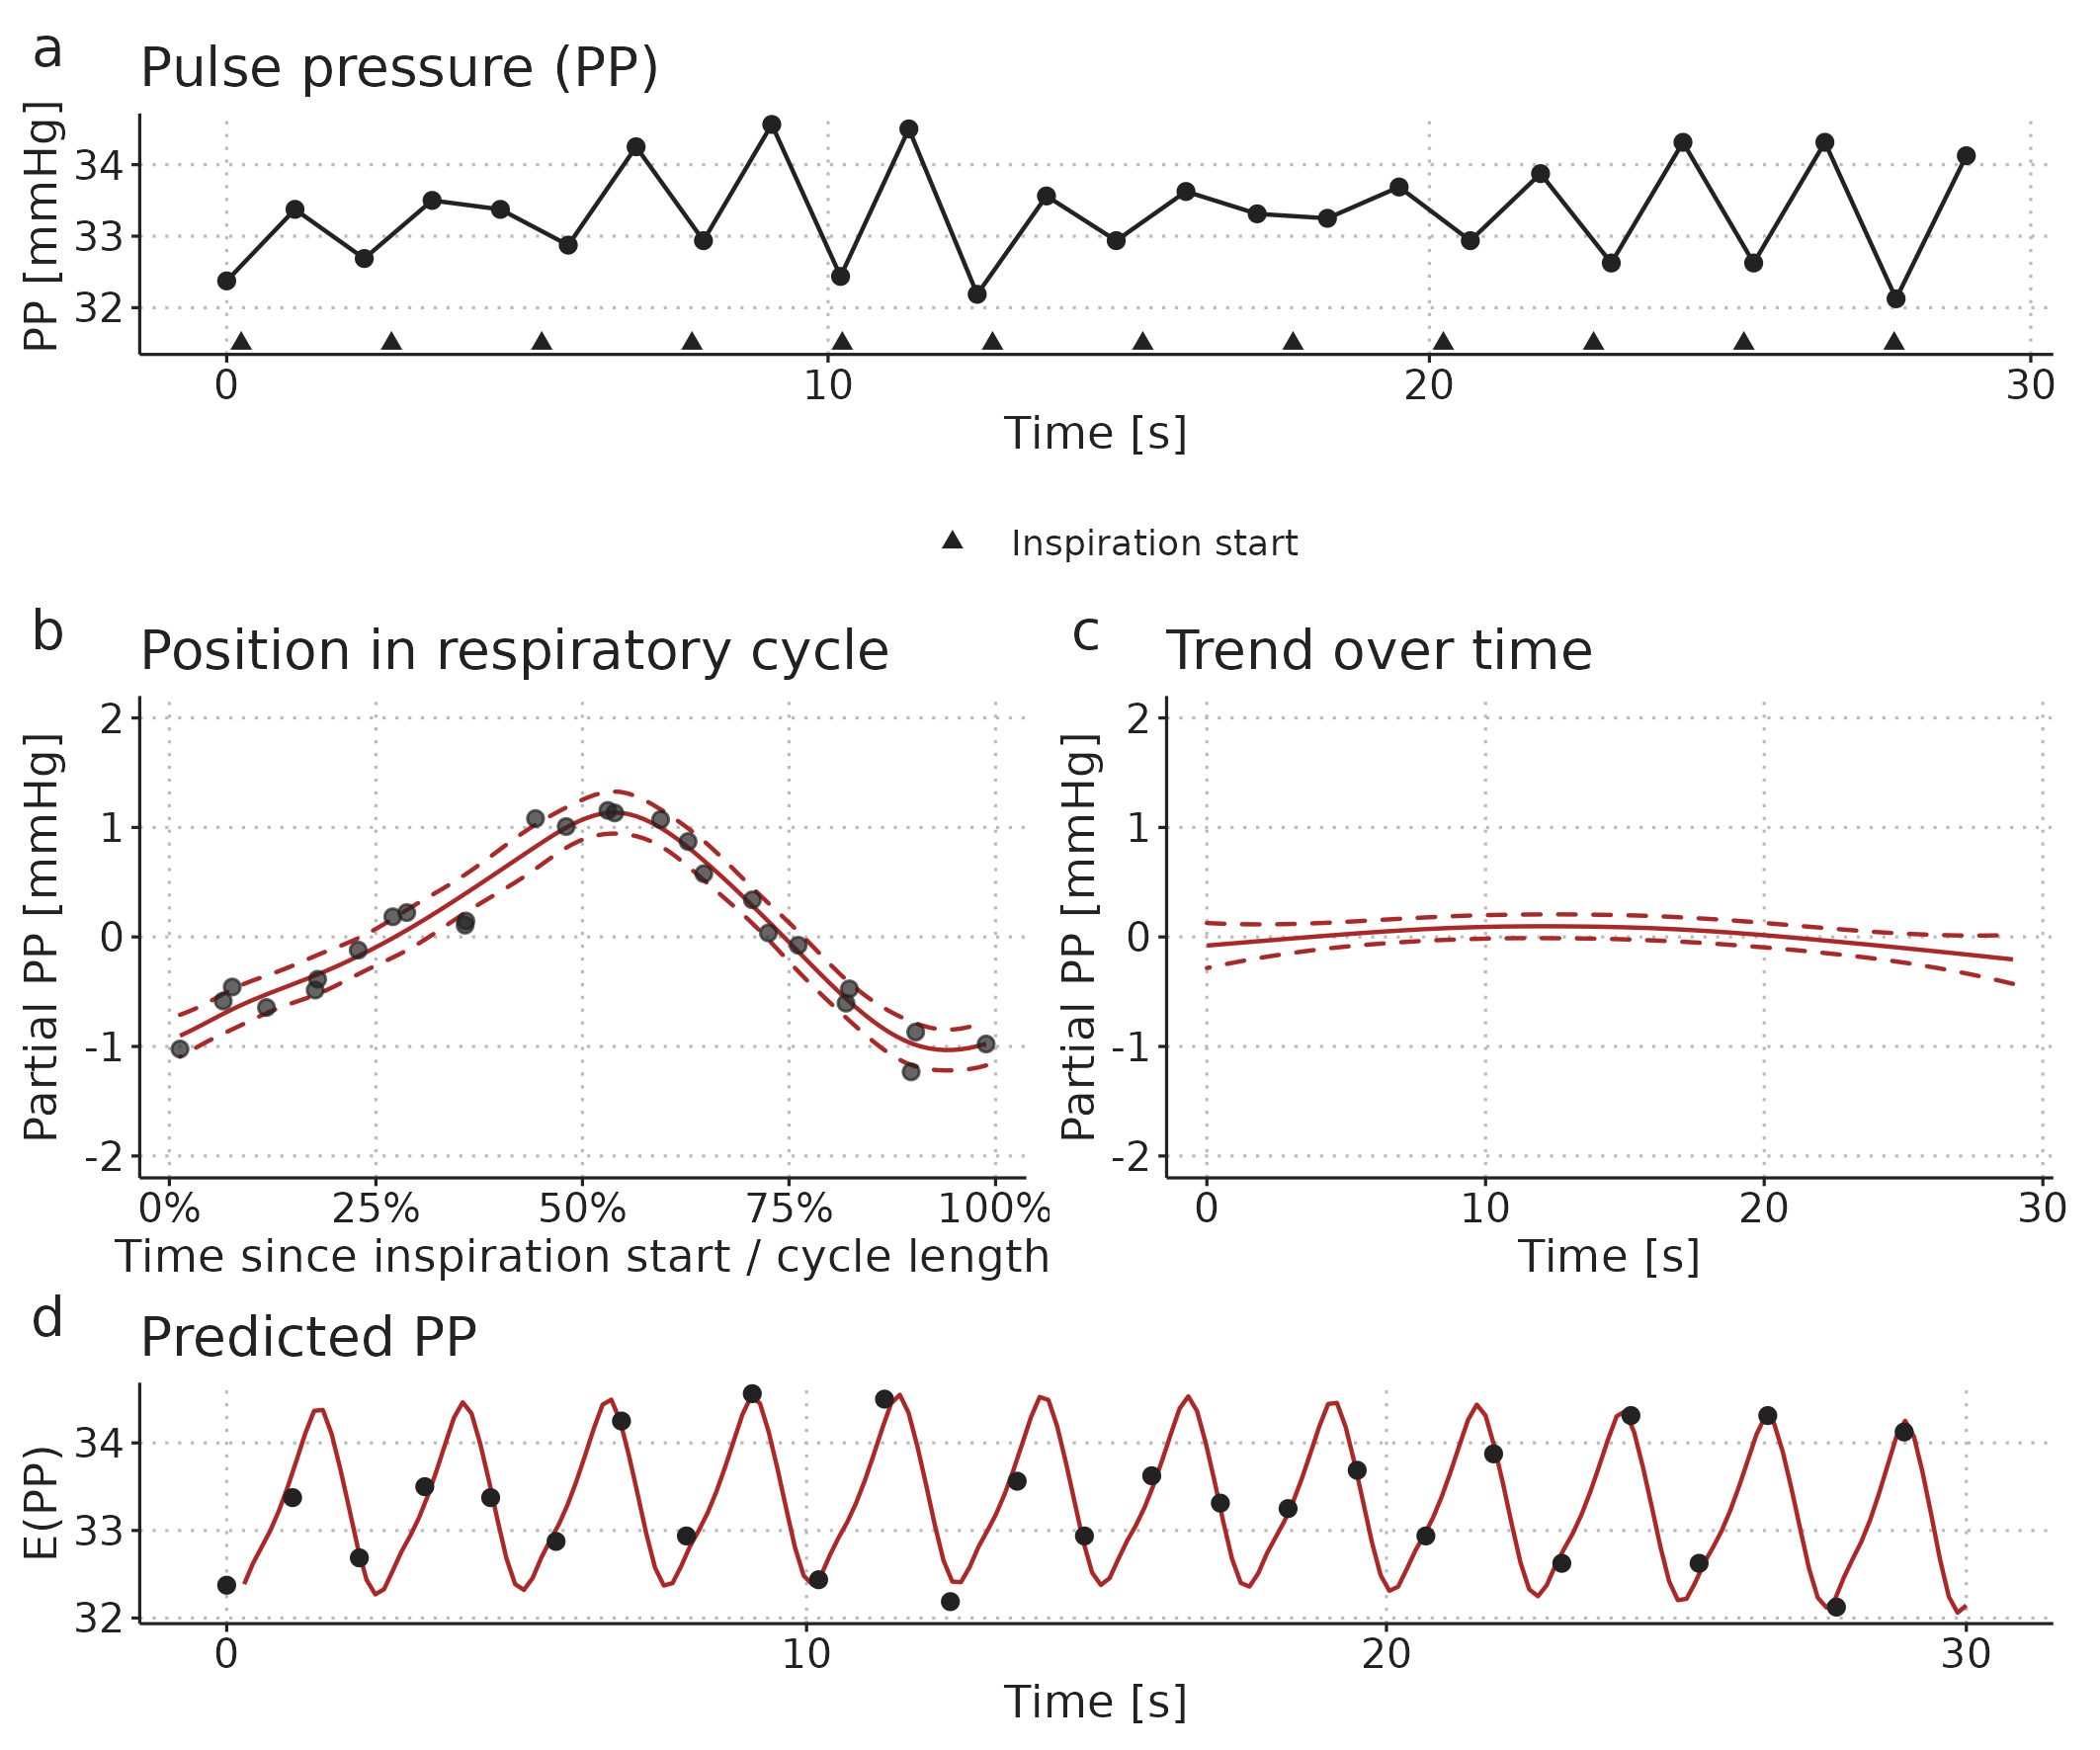 Illustration of a GAM fitted to a pulse pressure (PP) time series from a patient ventilated with a low HR/RR (2.17 beats per breath). a) The observed time series. b) A smooth repeating effect of ventilation. c) Trend over time. d) The models prediction (fit): the sum of the mean PP, the effect of ventilation (b) and the trend over time (c).